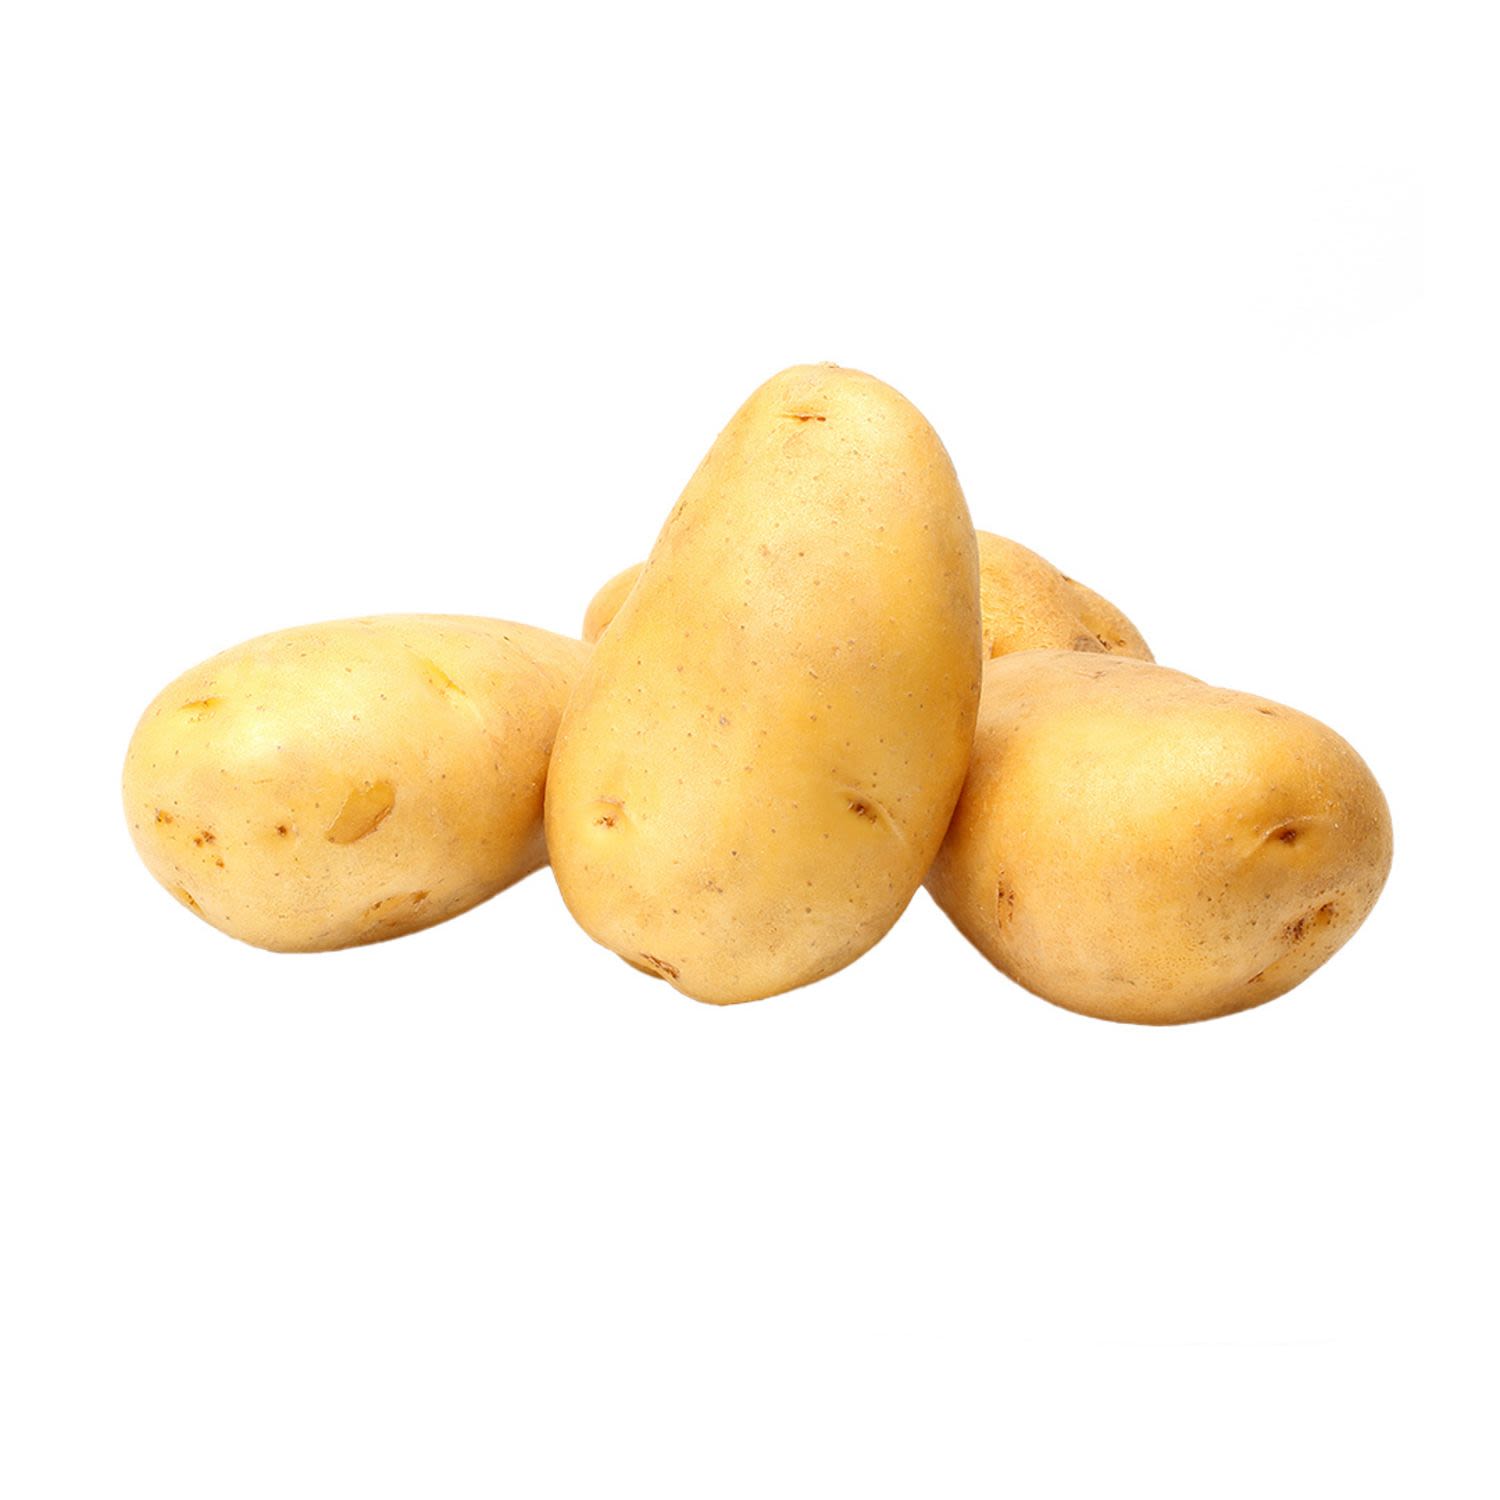 Washed Potatoes 2kg, 1 Each